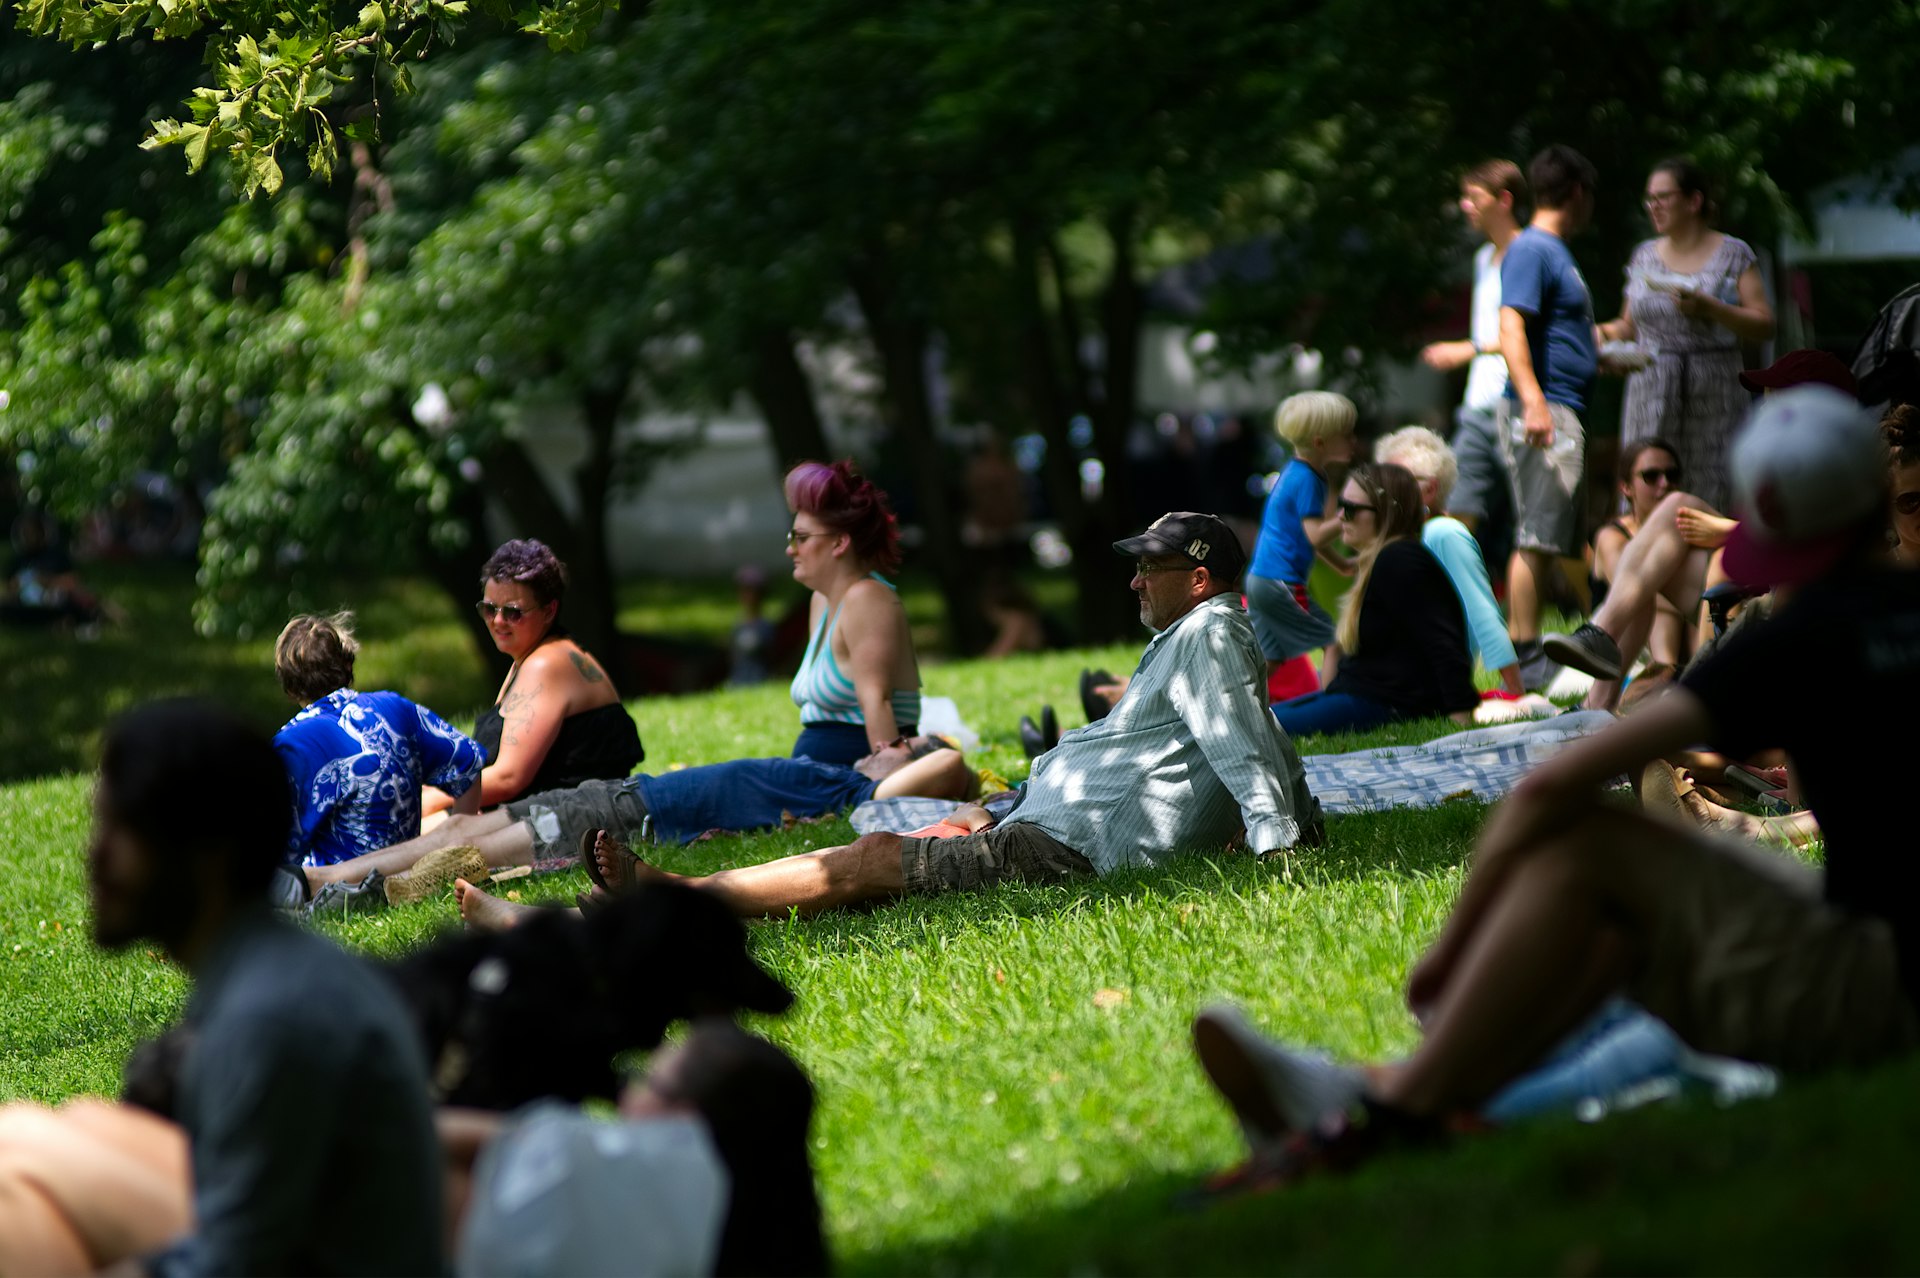 eople sit on the grass at an annual community festival as local bands perform and arts, crafts and food vendors line pathways in a park in the West Philadelphia neighborhood, in Philadelphia, PA.